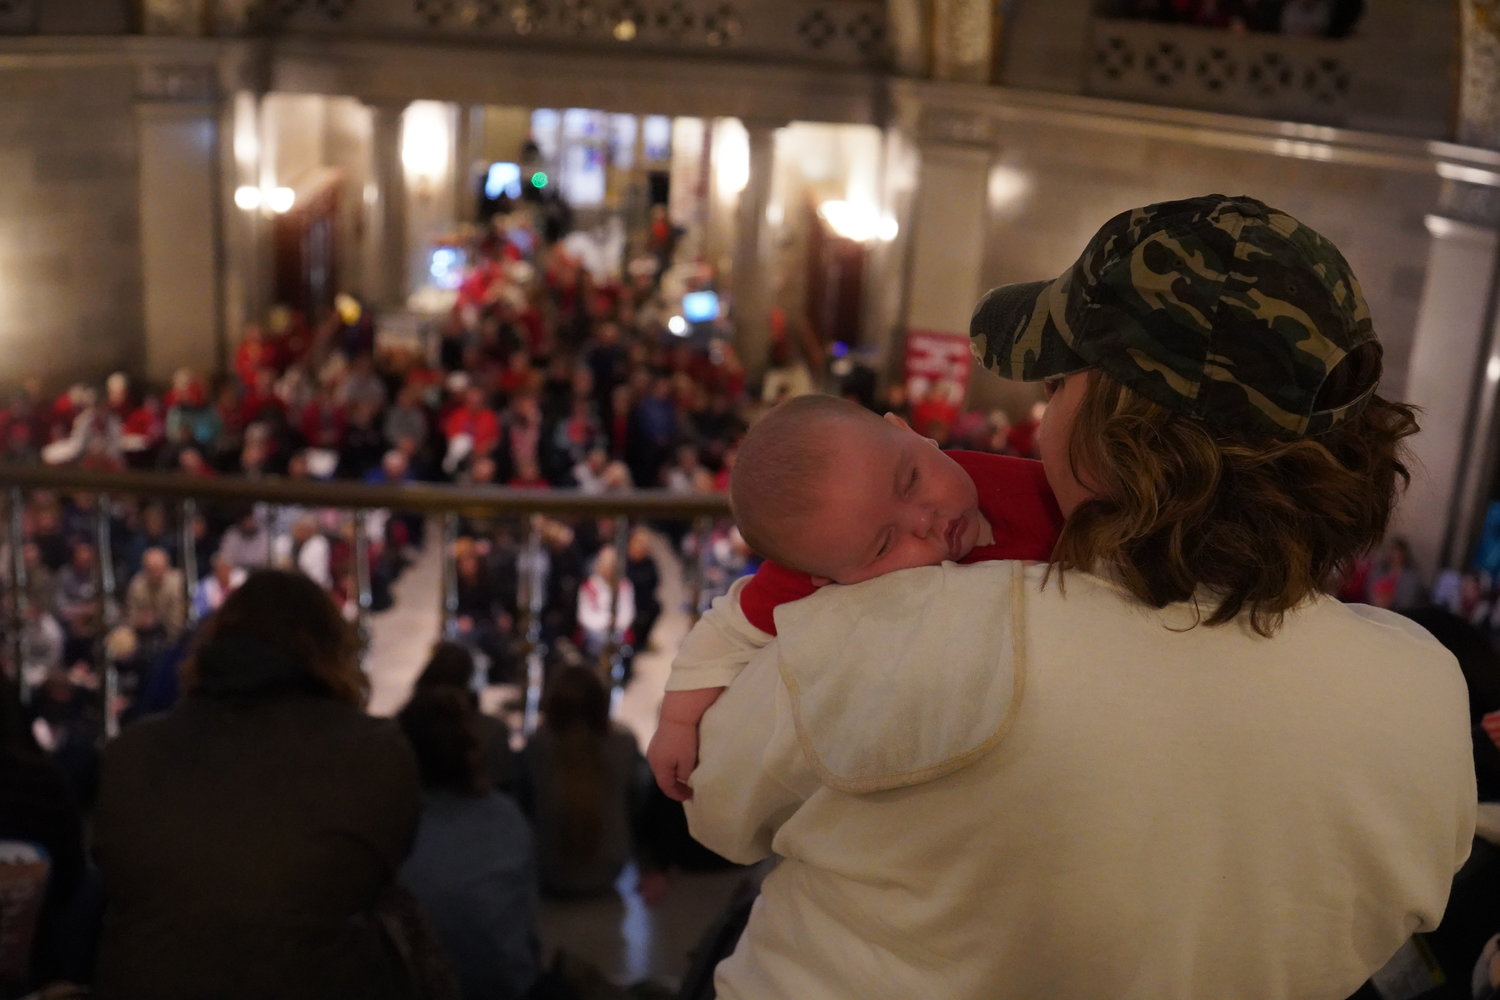 A mother from the Jefferson City diocese rocks her sleeping baby while keynote speaker Abby Johnson addresses a crowd of over 2,000 at an April 20 rally in the Missouri State Capitol Rotunda as part of the 2022 Midwest March for Life.